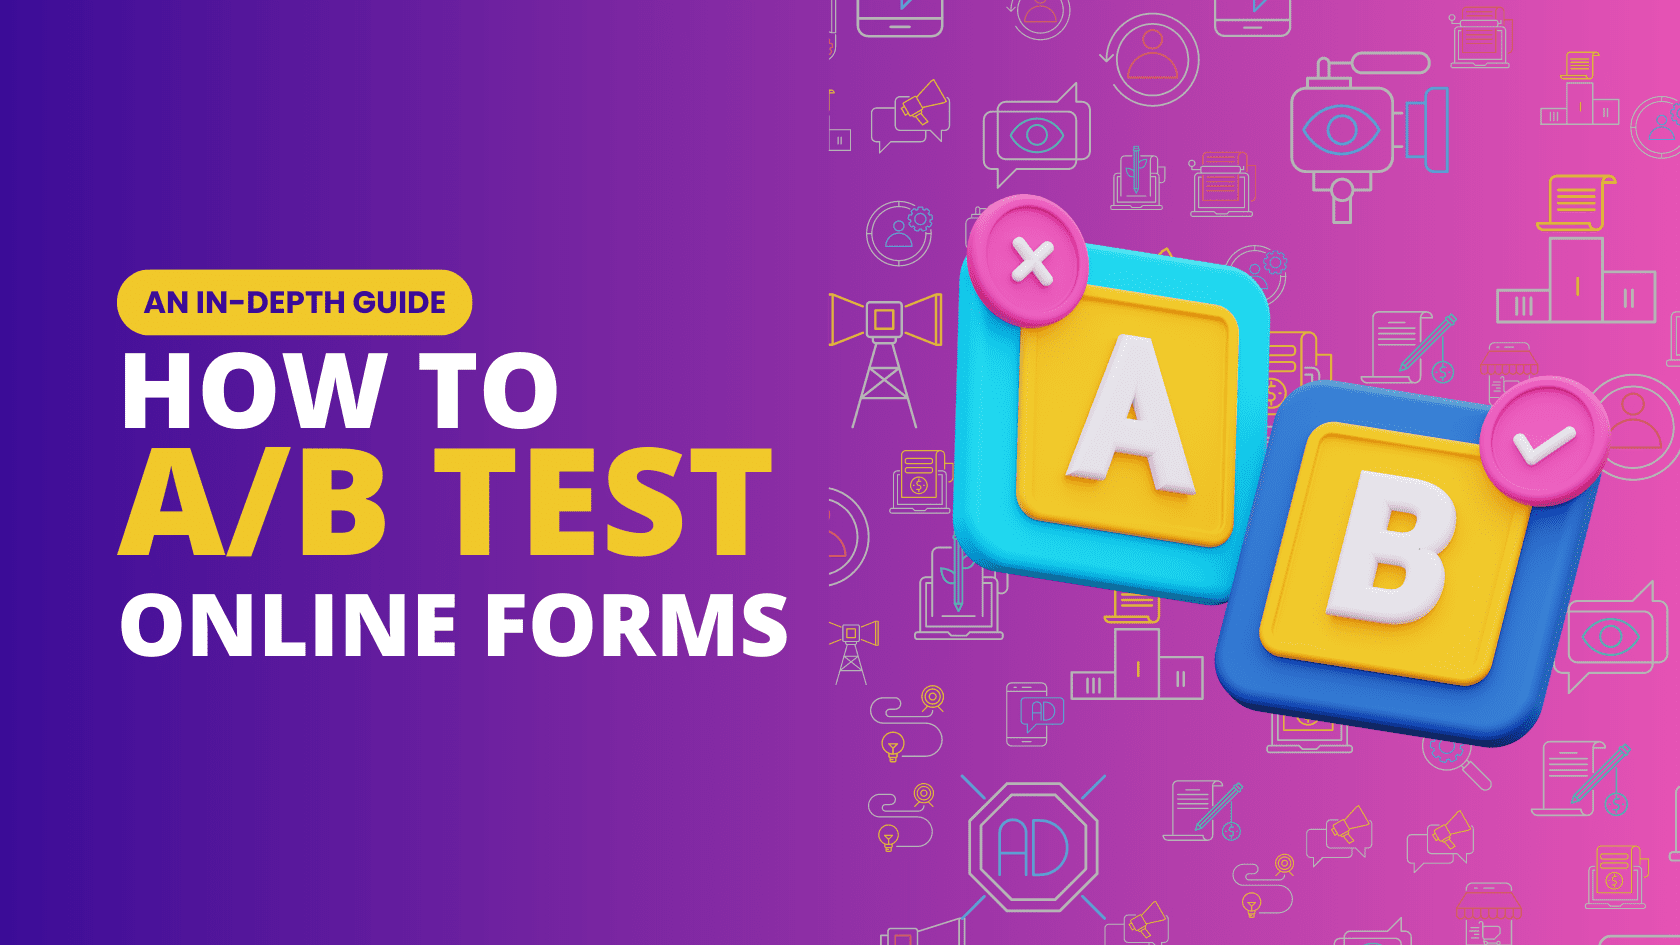 An in-depth guide: how to a/b test online forms" against a vibrant purple background with tech-related icons.